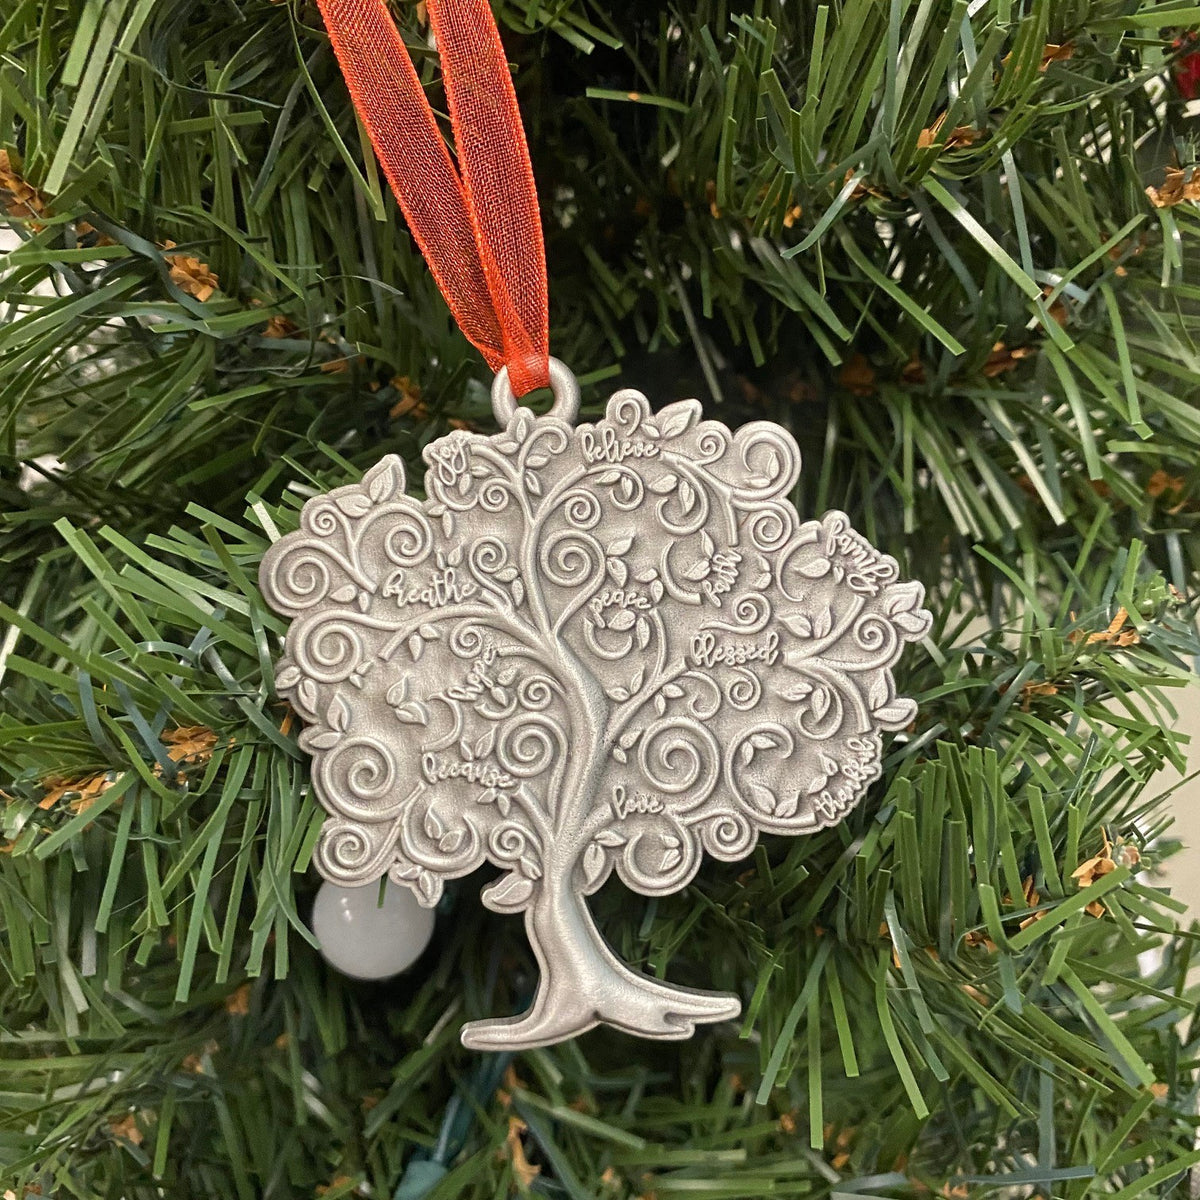 Sharpie Marker for pewter ornament writing - Plymouth Cards